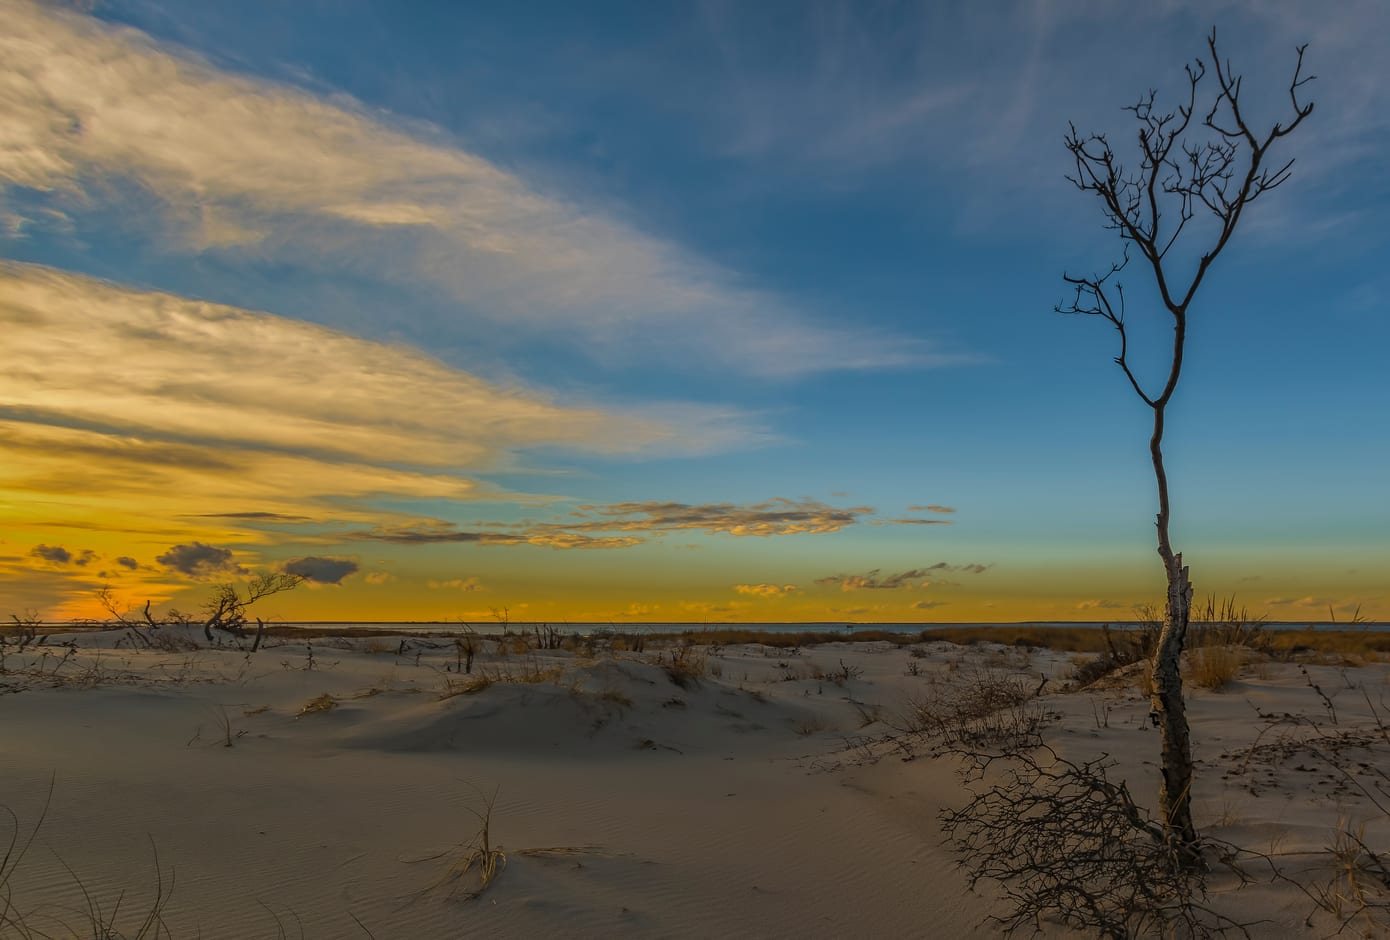 Sunset at the Edwin B. Forsythe National Wildlife Refuge in Long Beach Township, New Jersey